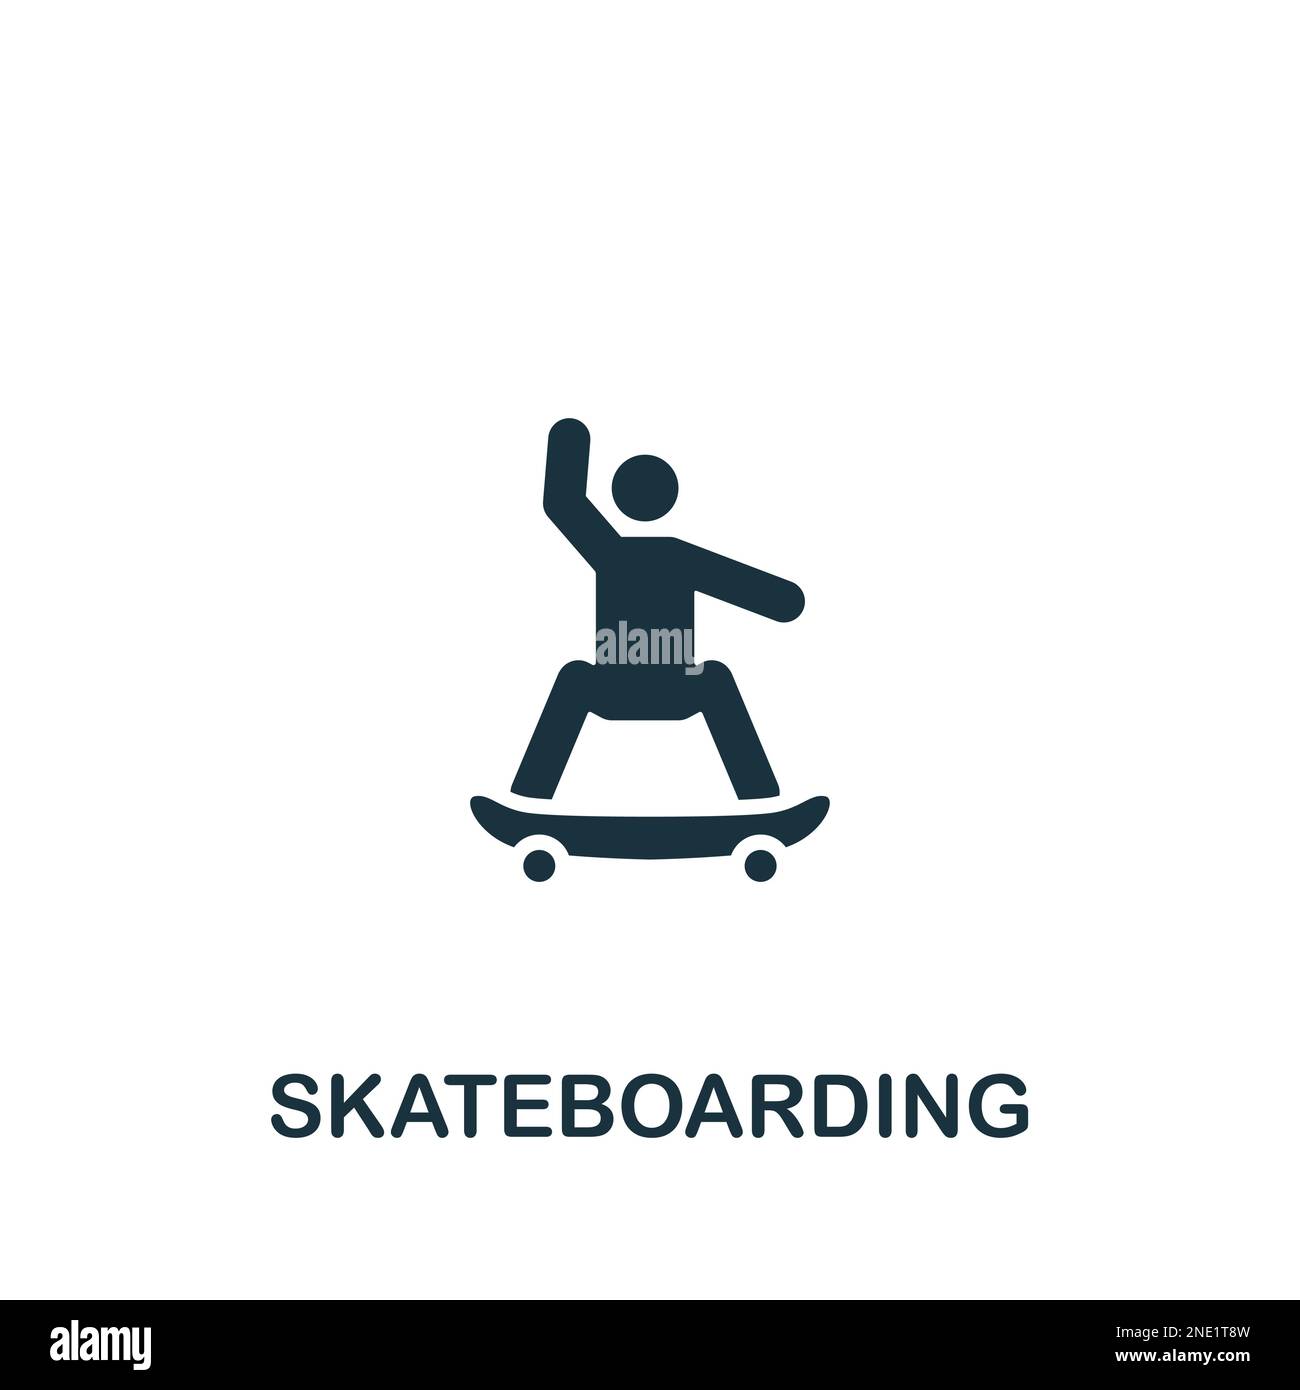 Skateboarding icon. Monochrome simple sign from hobby collection. Skateboarding icon for logo, templates, web design and infographics. Stock Vector